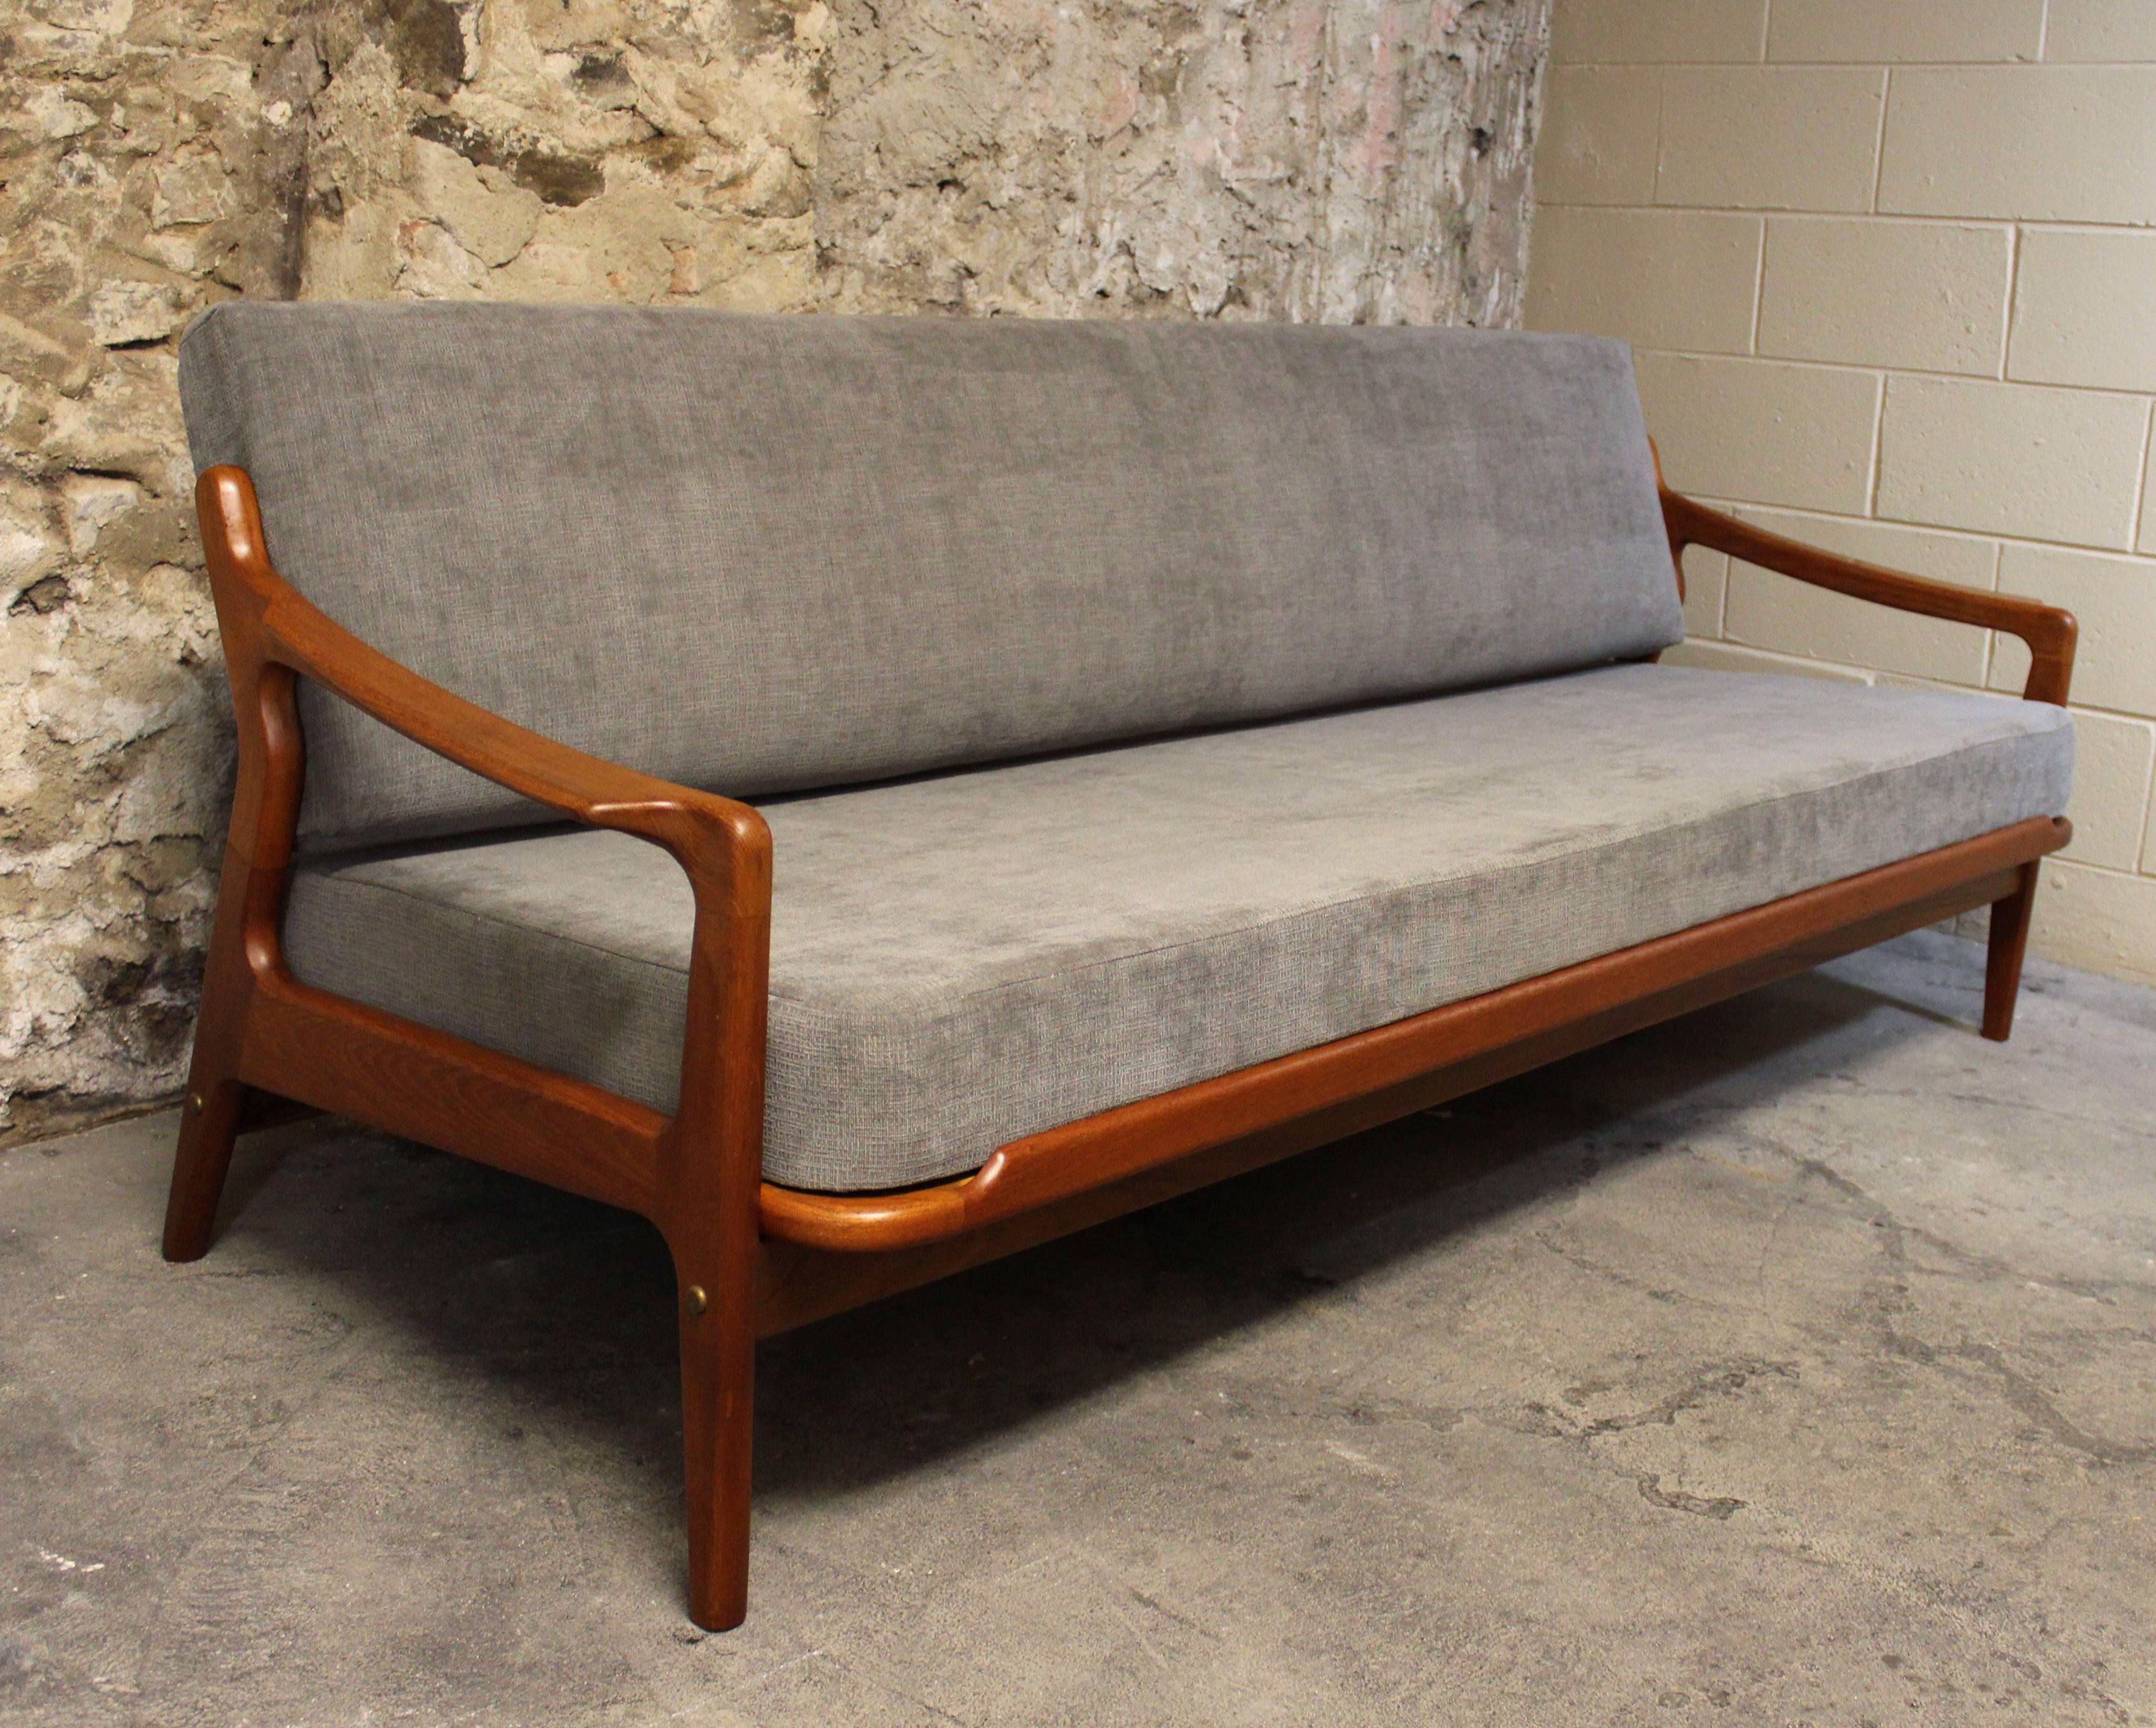 Arne Wahl Iversen Danish teak daybed and sofa
This three-seat Mid-Century Modern sofa by Arne Wahl Iversen was produced in Denmark in the 1960s. This piece is made from teak and can be simply used as a sofa, or it easily rolls out for a comfortable